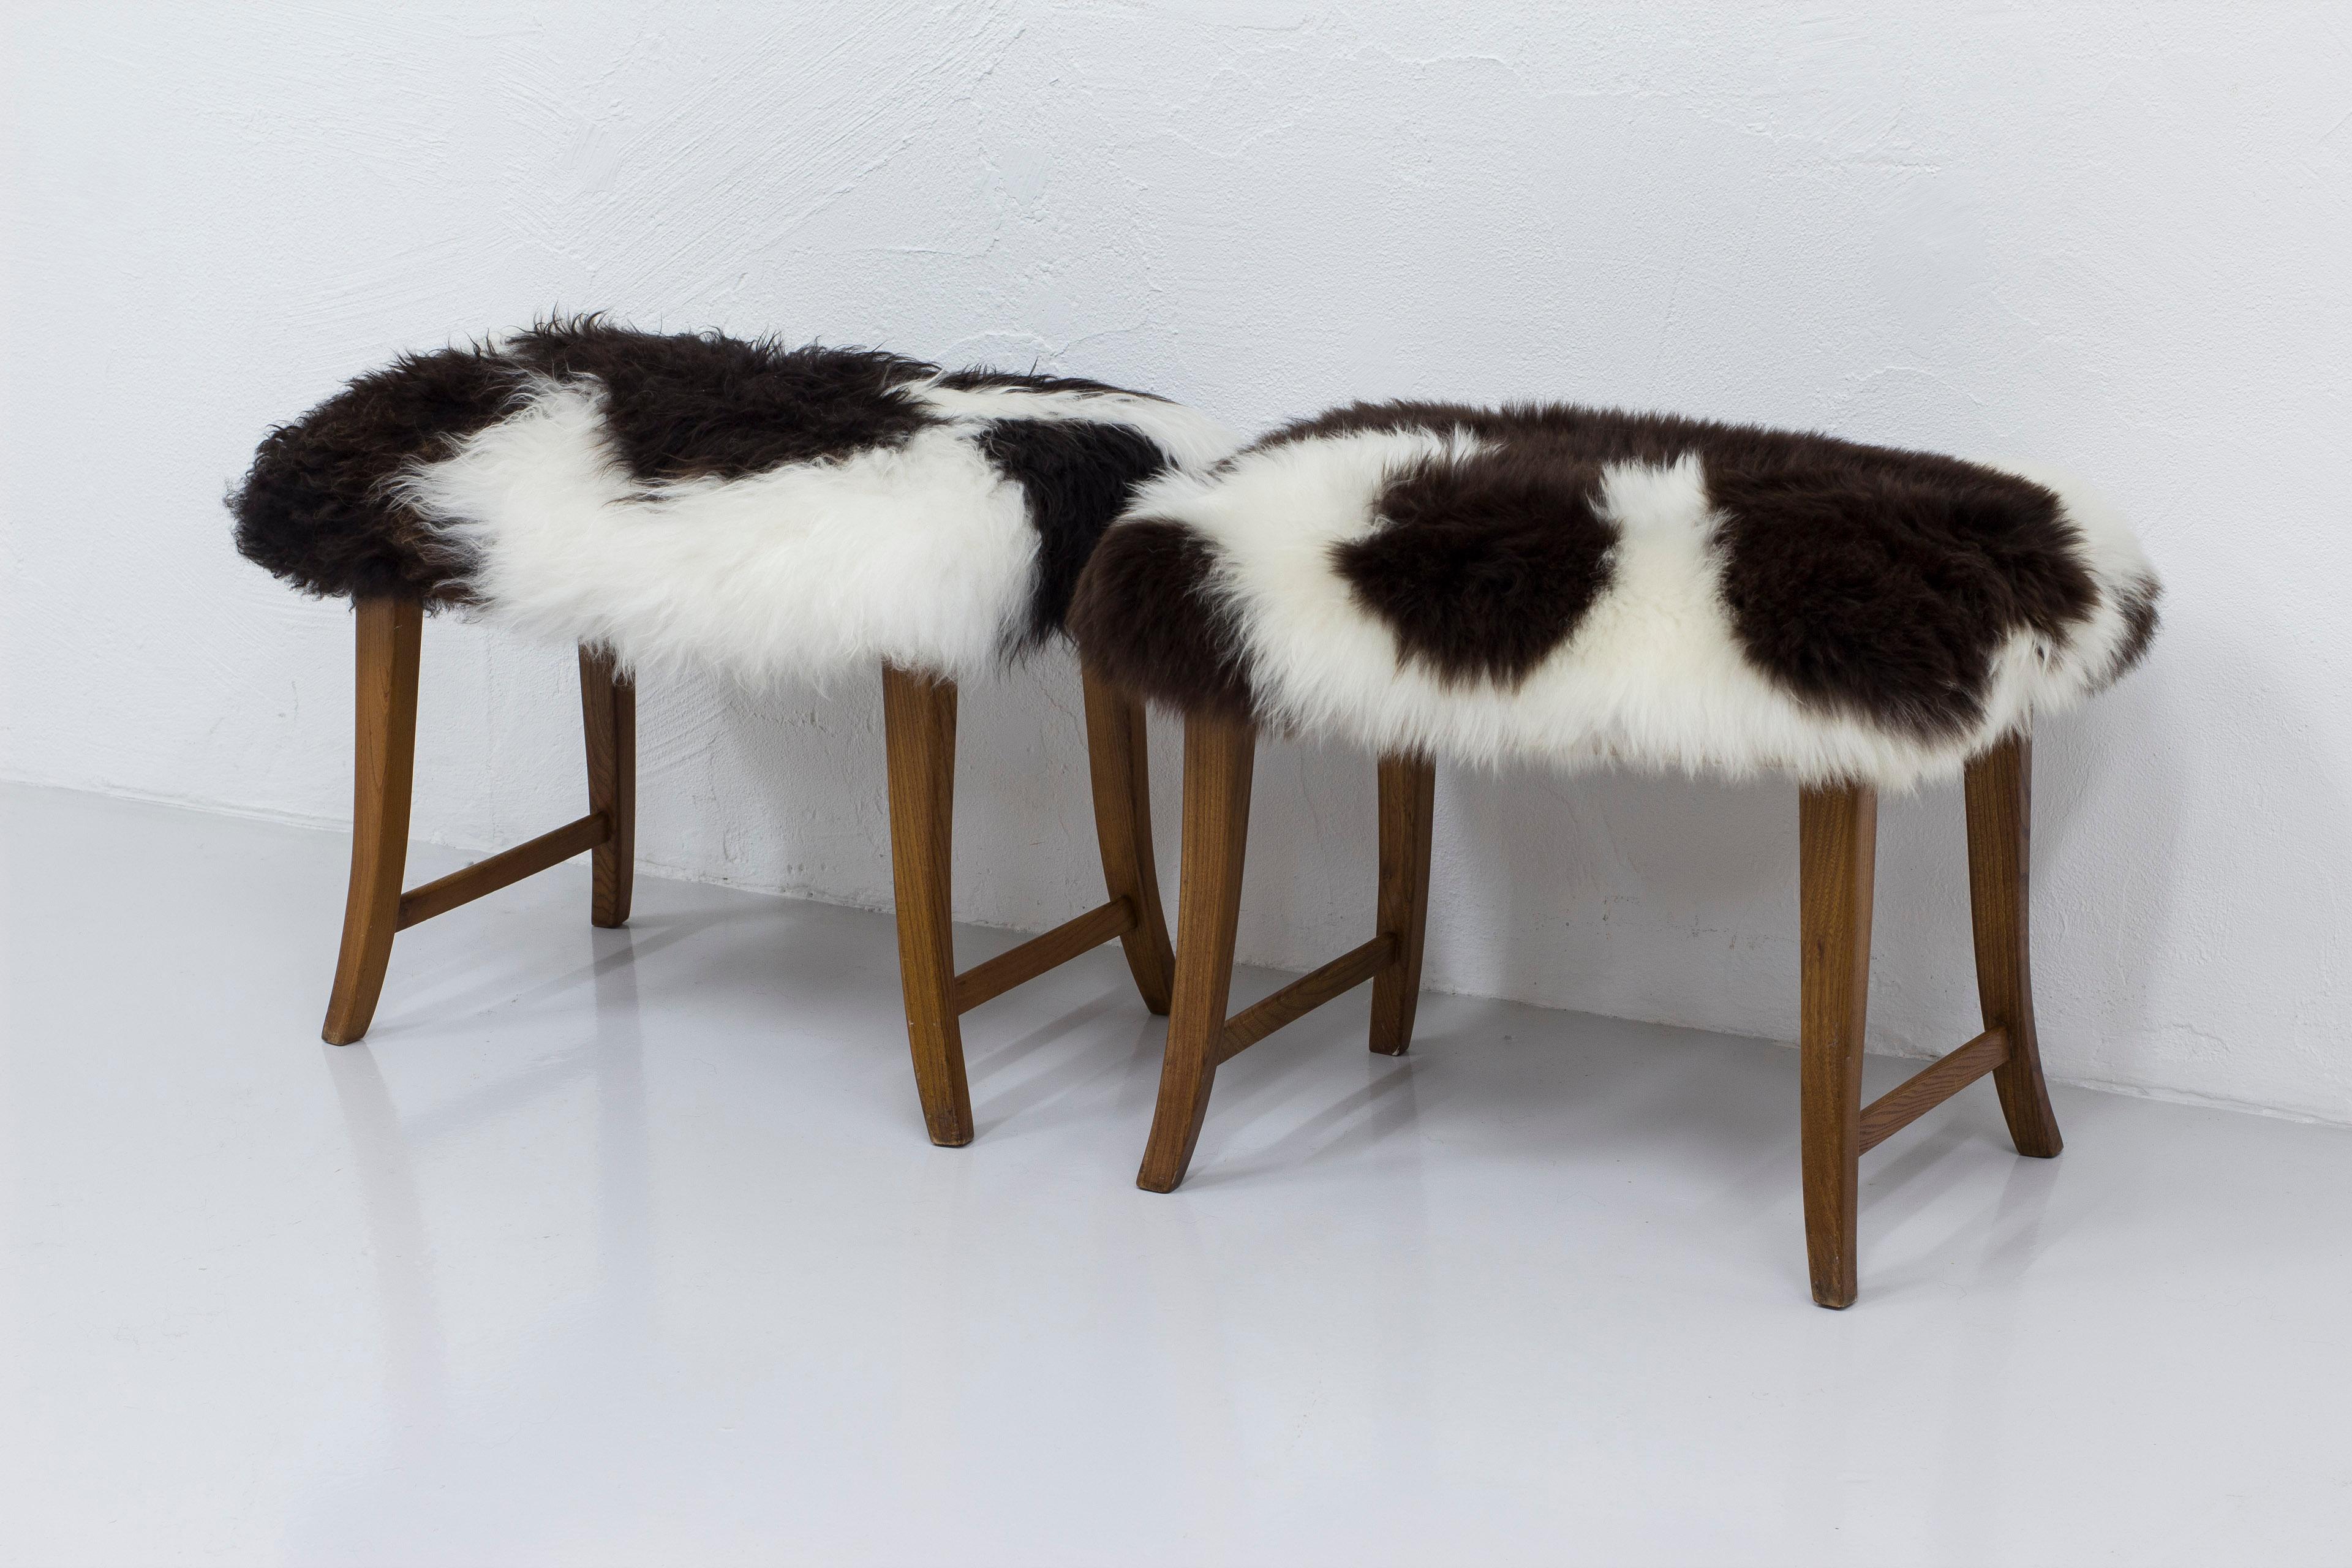 Pair of Swedish modern stools made ca 1940s. Curved and slightly tapered legs in solid elm. New upholstery in longhaired sheepskin with natural color. Works just as well as stools or footrests. Very good vintage condition with light age related wear